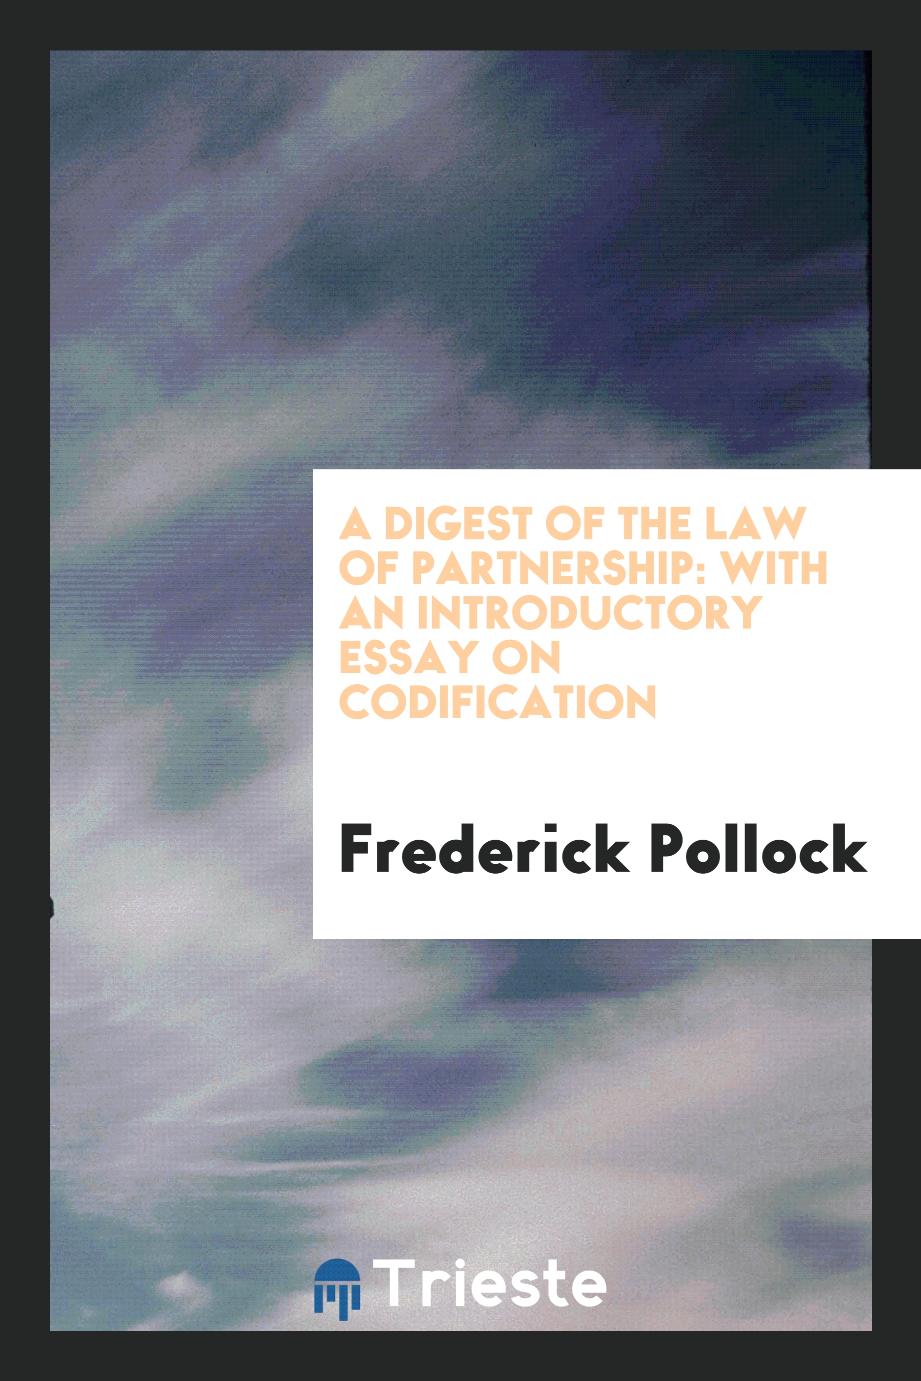 A Digest of the Law of Partnership: With an Introductory Essay on Codification